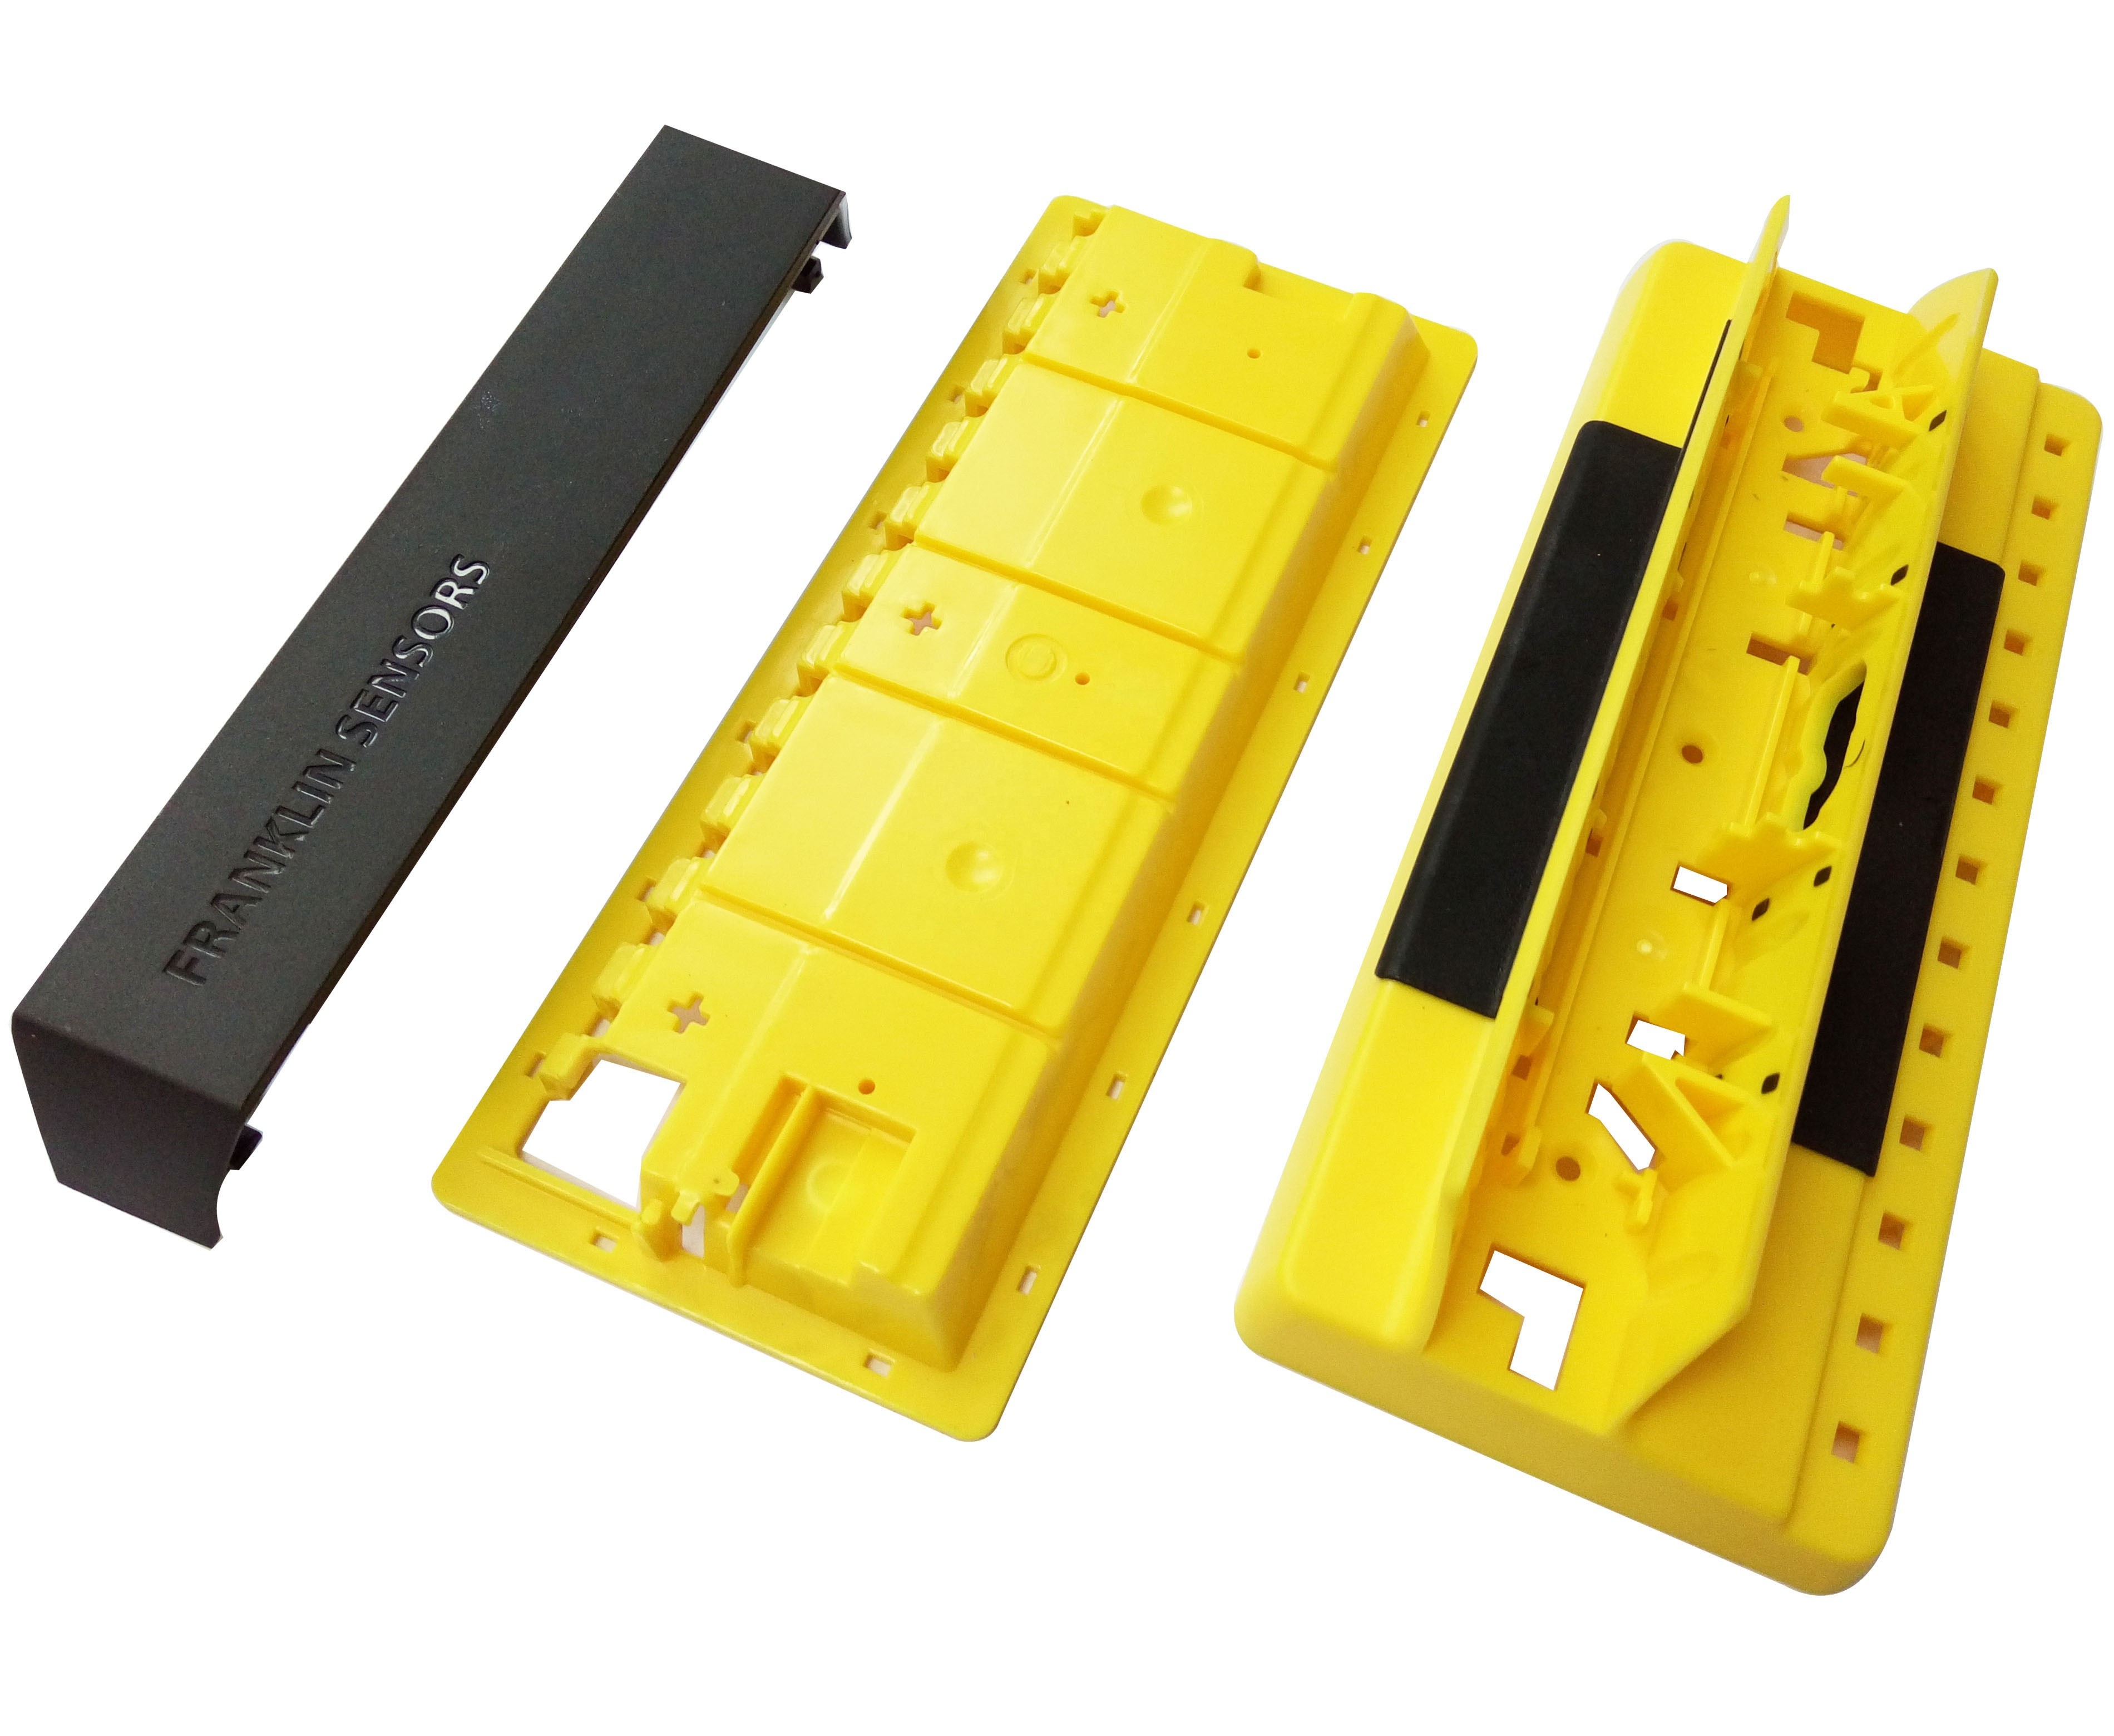 Hot sale new customized Plastic Detector Housing Cases in Customized Shape